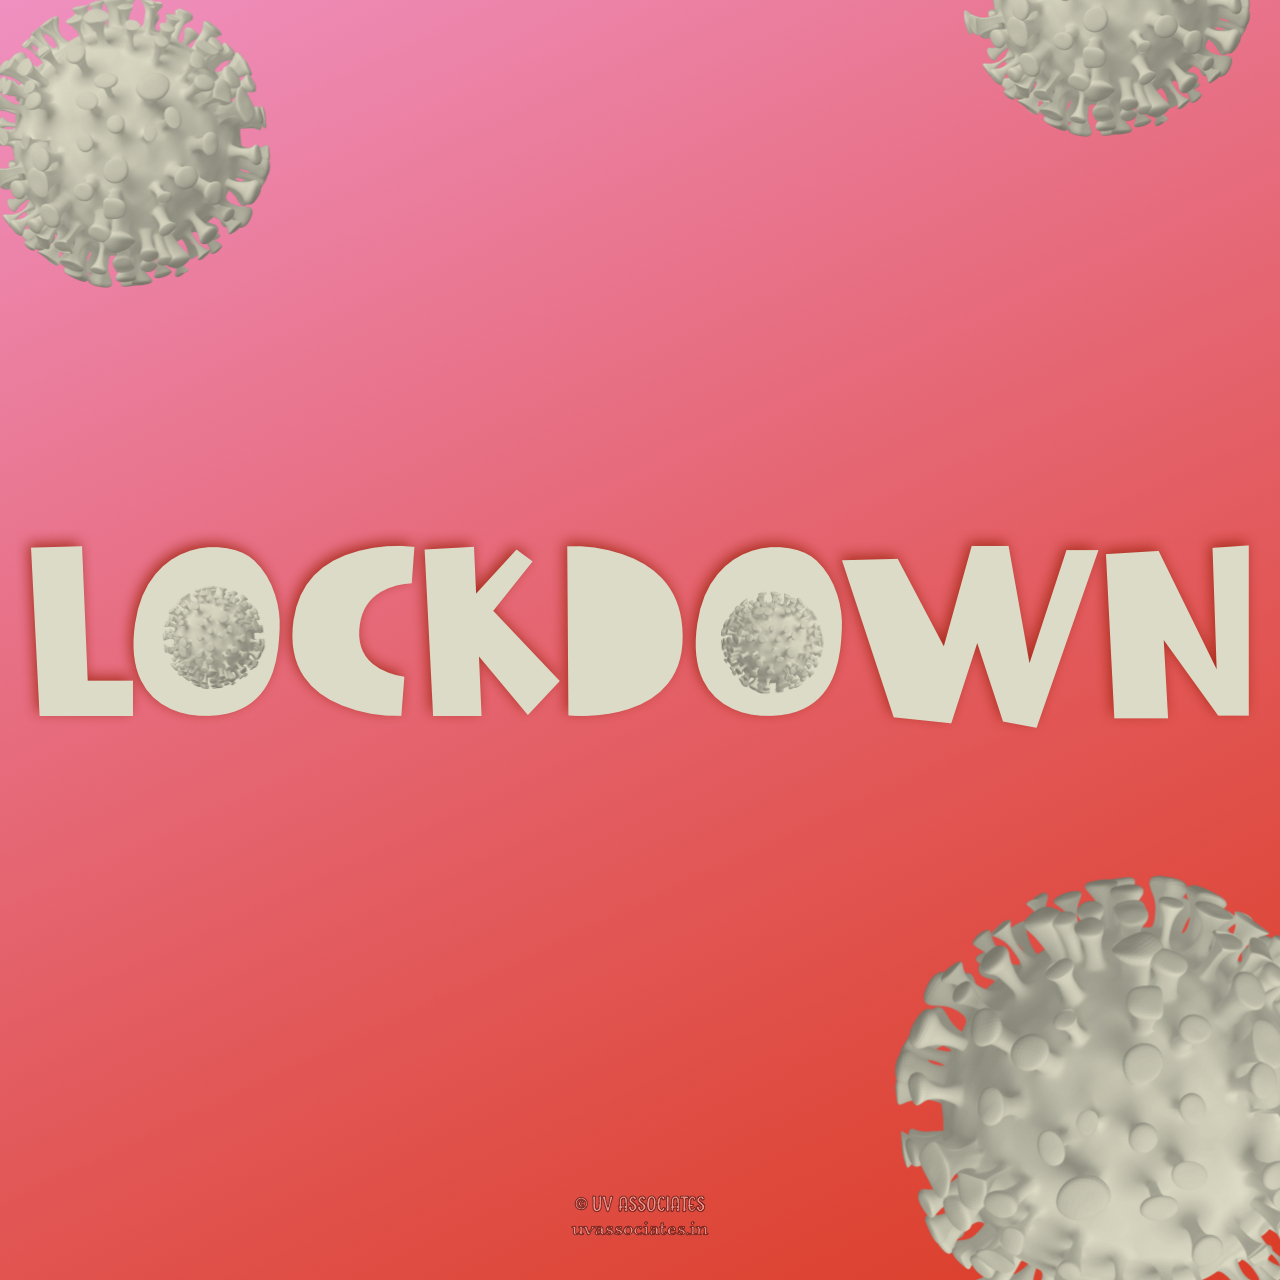 Lockdown text on gradient background with 3d renders of Covid-19 cells